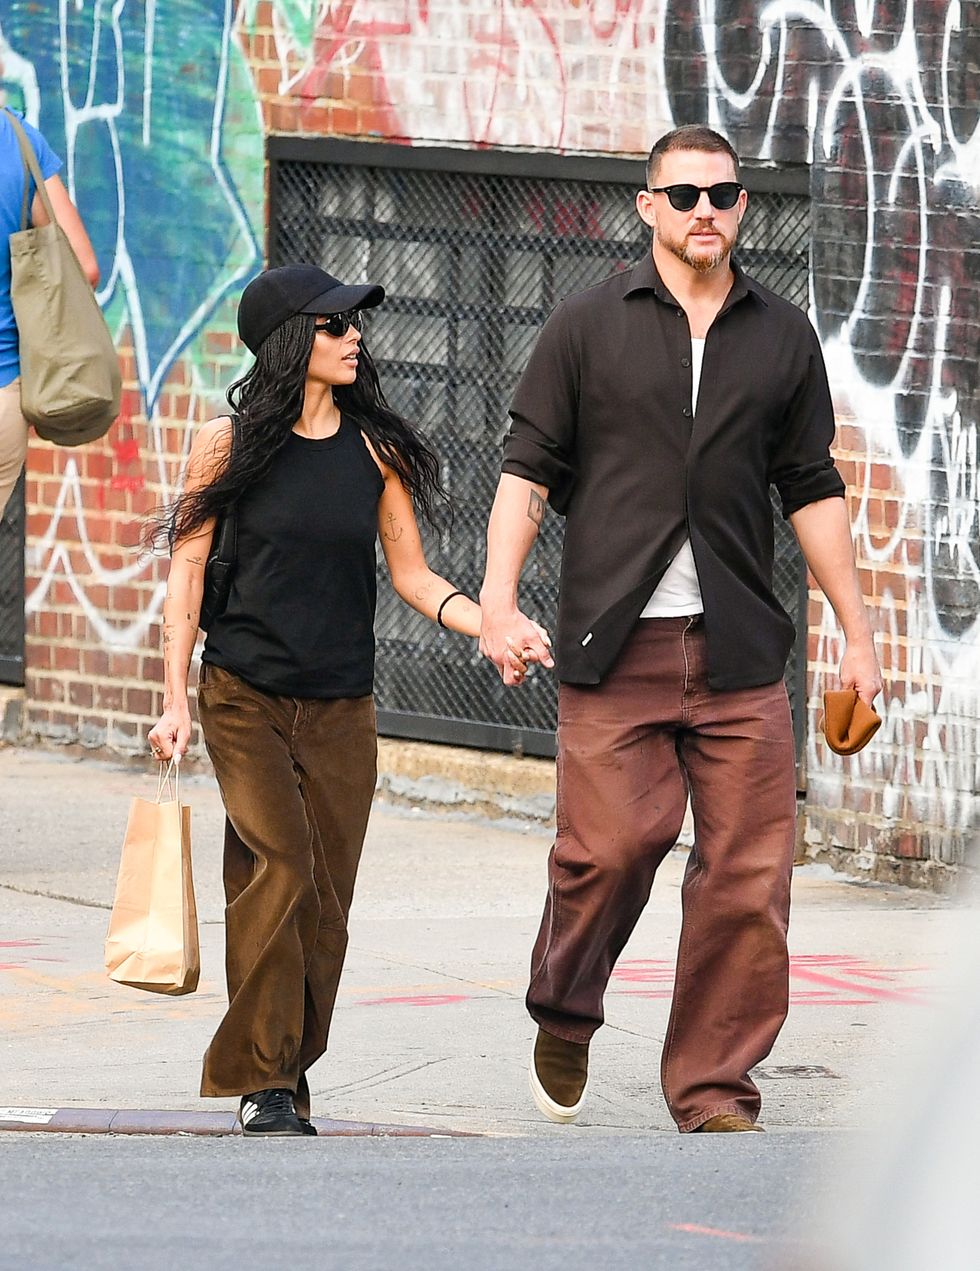 09182022 exclusive channing tatum and zoe kravitz are twinning as they holds hands while on a stroll in new york city the in love couple have reportedly been filming a project that zoe is directing, and channing is starring in salestheimagedirectcom please bylinetheimagedirectcomexclusive please email salestheimagedirectcom for fees before use